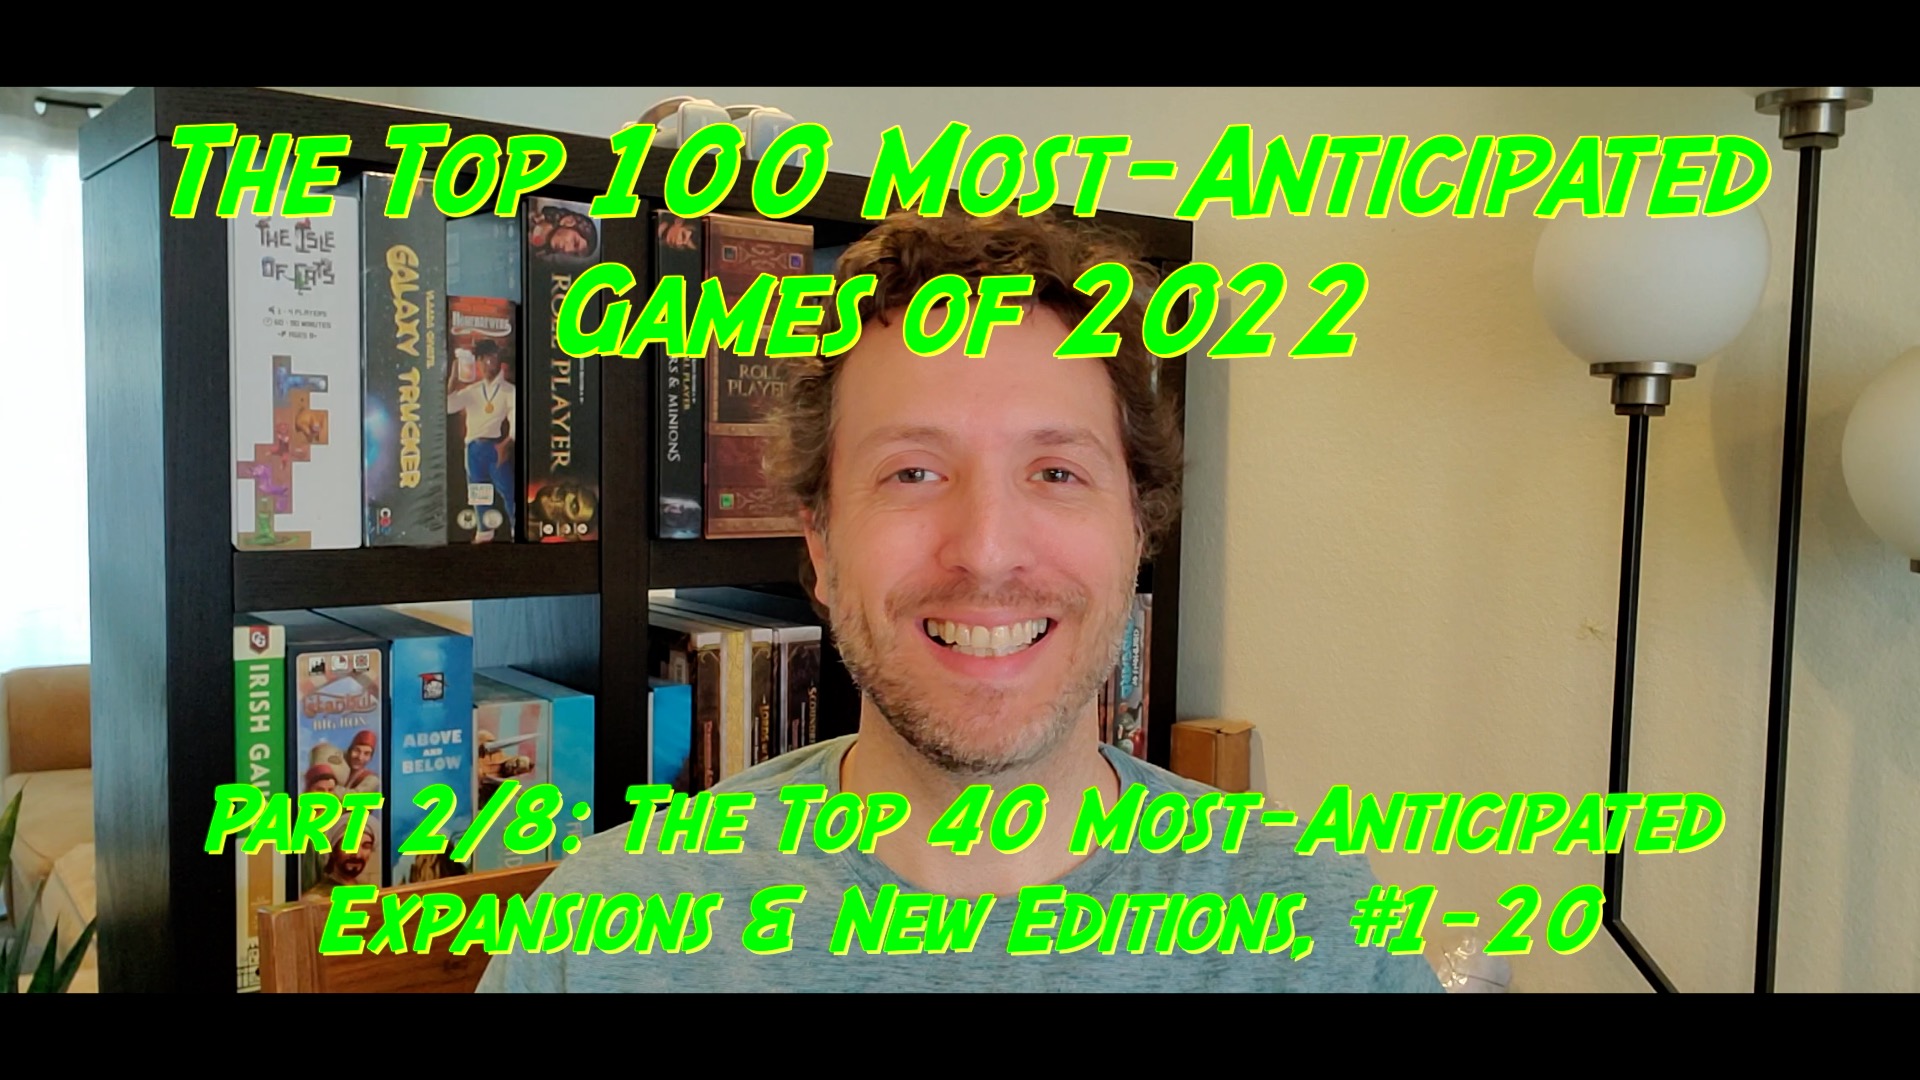 The Top 100 Most-Anticipated Games of 2022, Part 2/8: The Top 50 Most-Anticipated Expansions & New Editions, #1-20